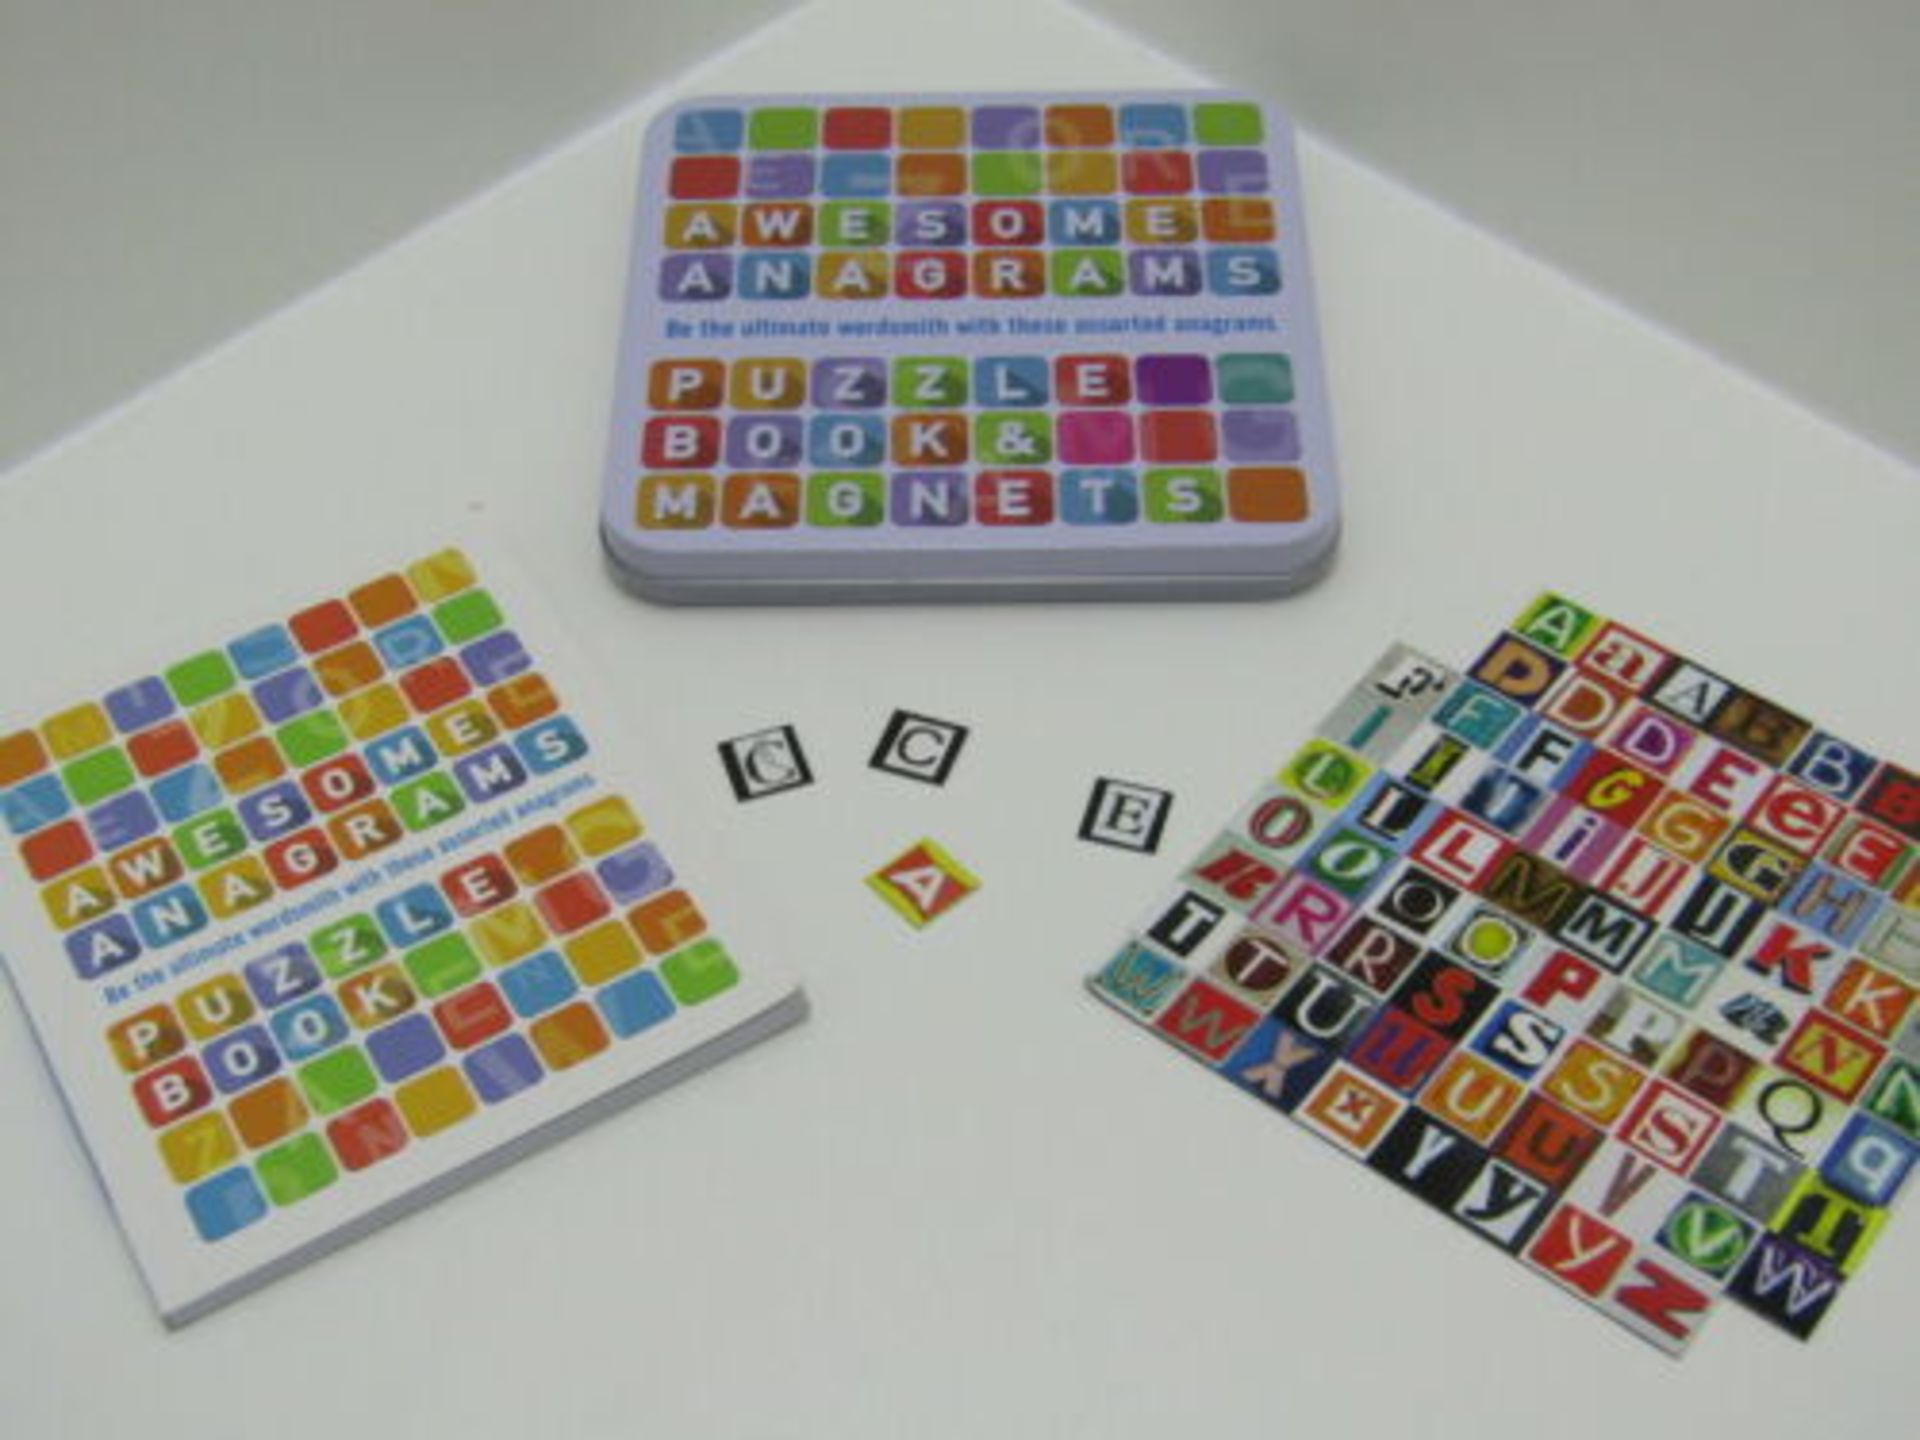 24 x Awesome Anagrams Puzzle Book & Magnet Set. Game. no vat on hammer.You will get 24 of these.